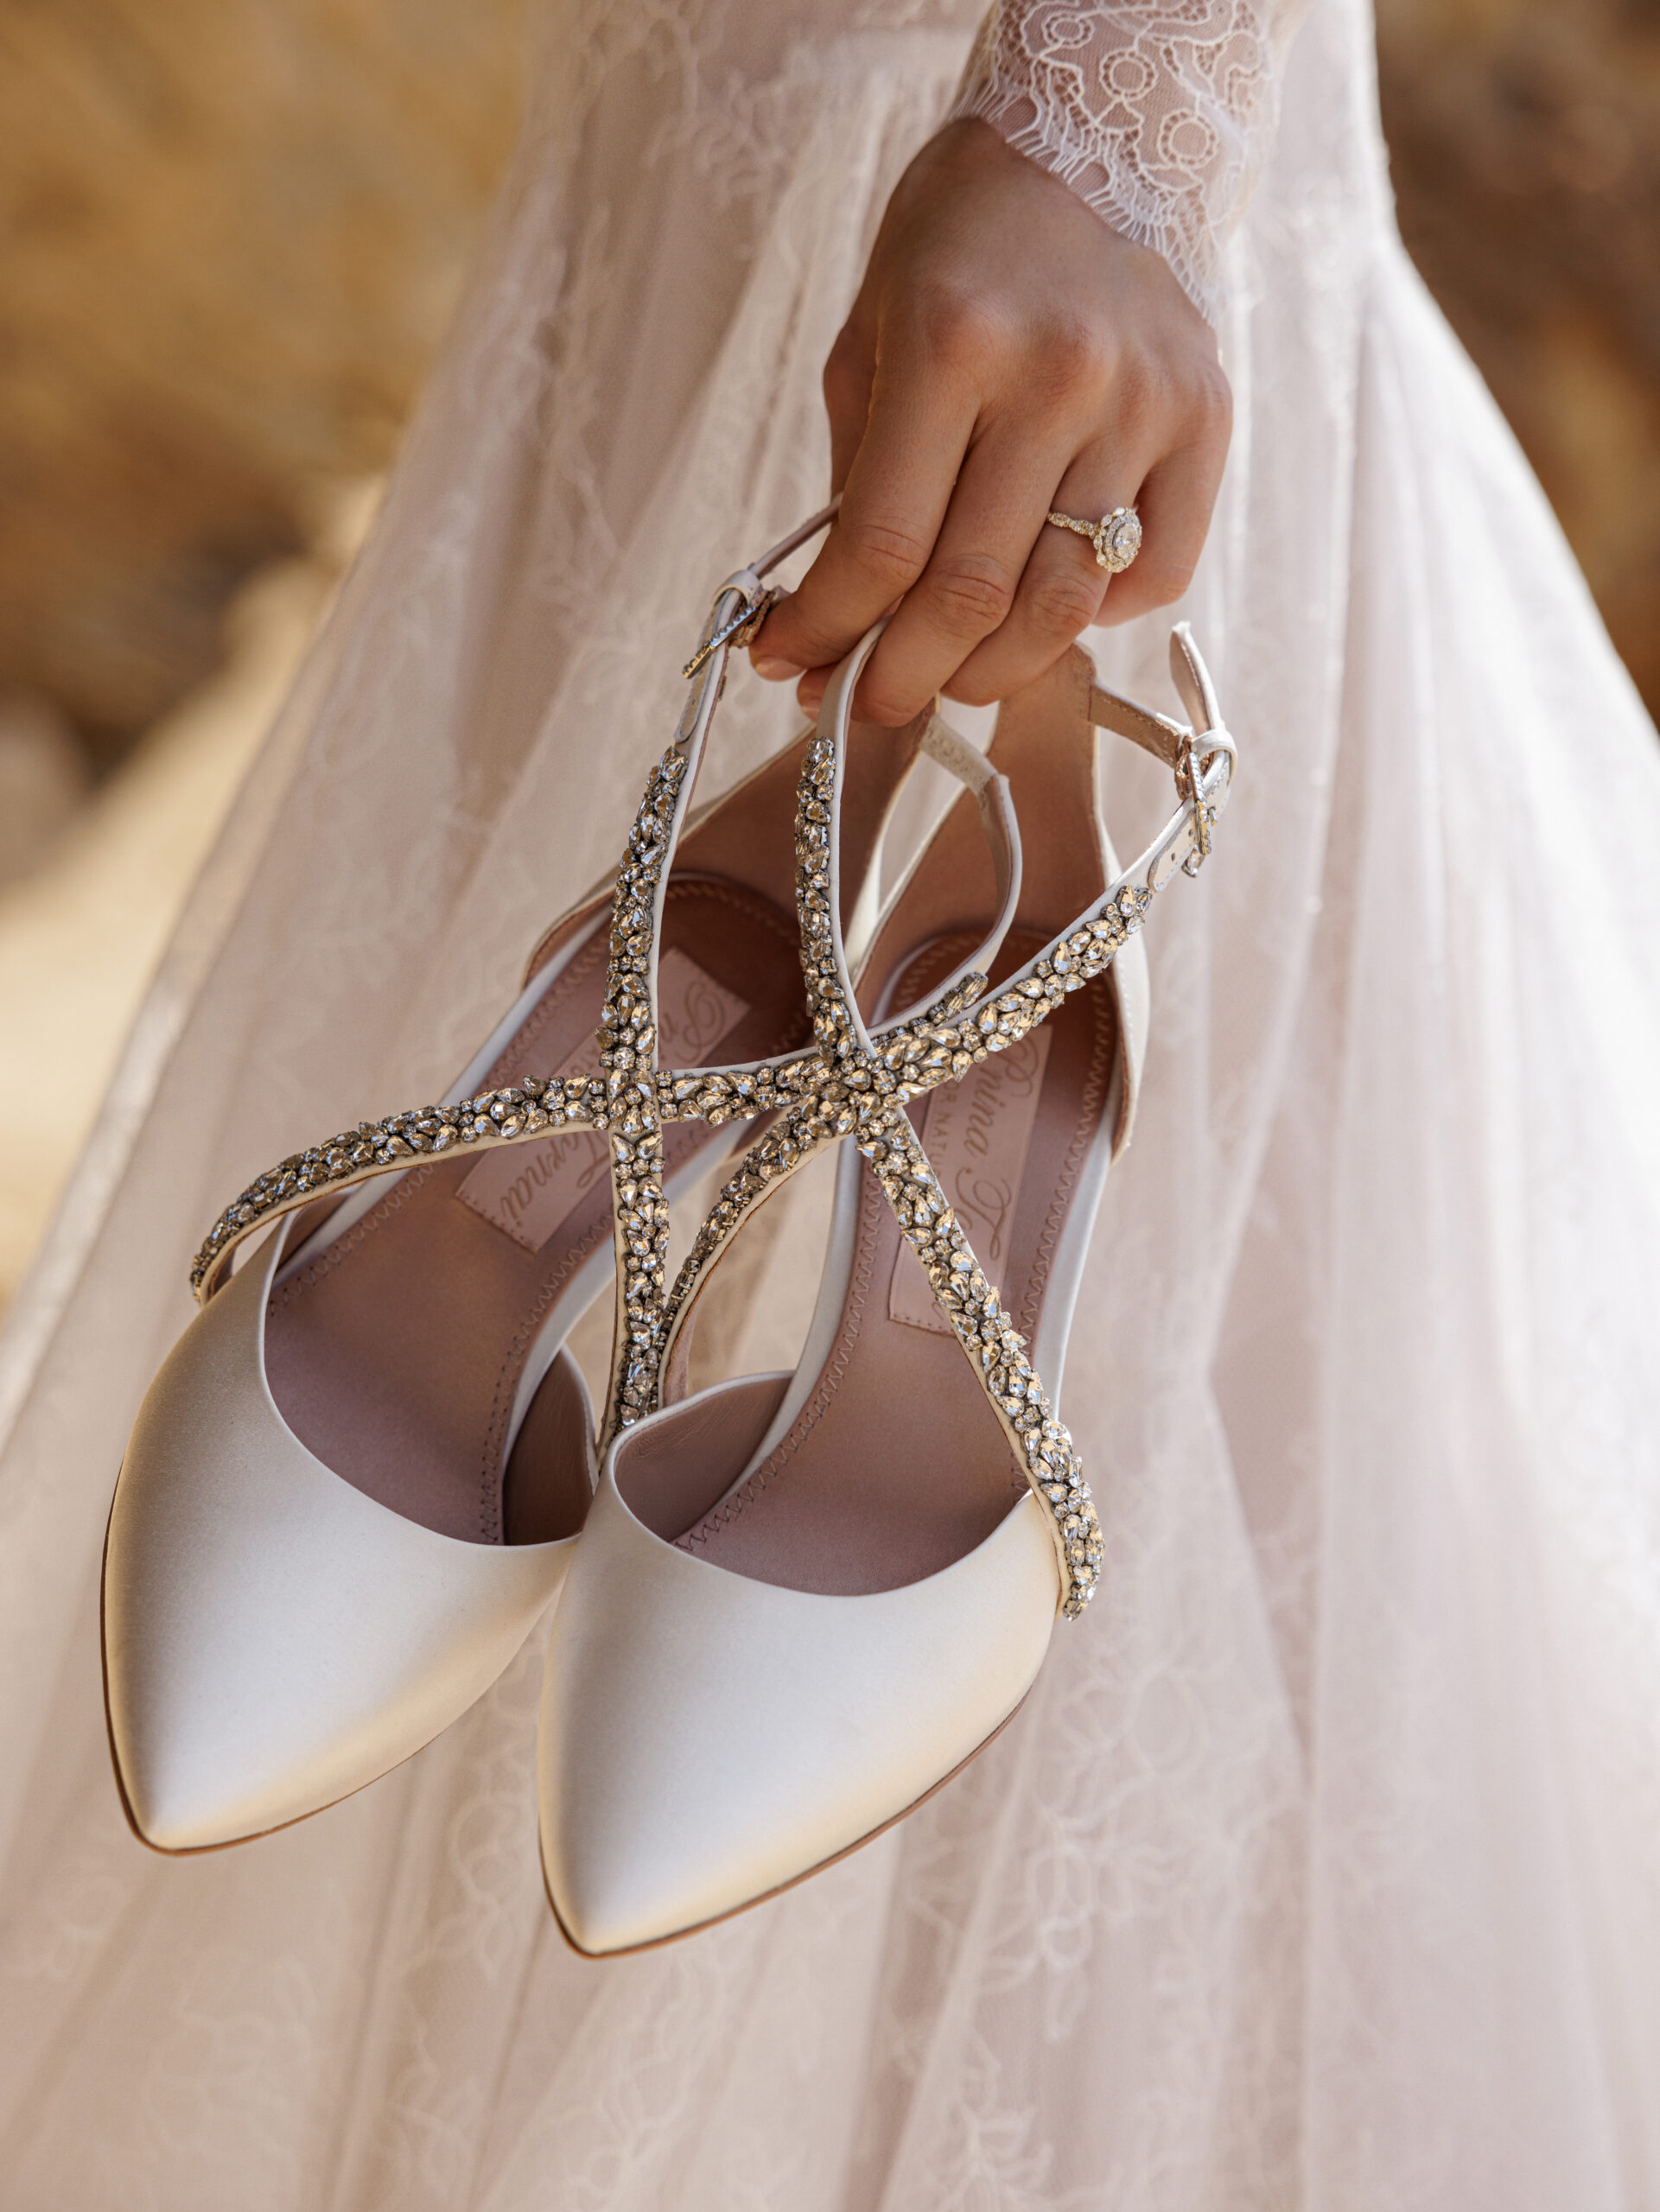 Classy Jimmy Choo Wedding Shoes with Embelishment for your Walk